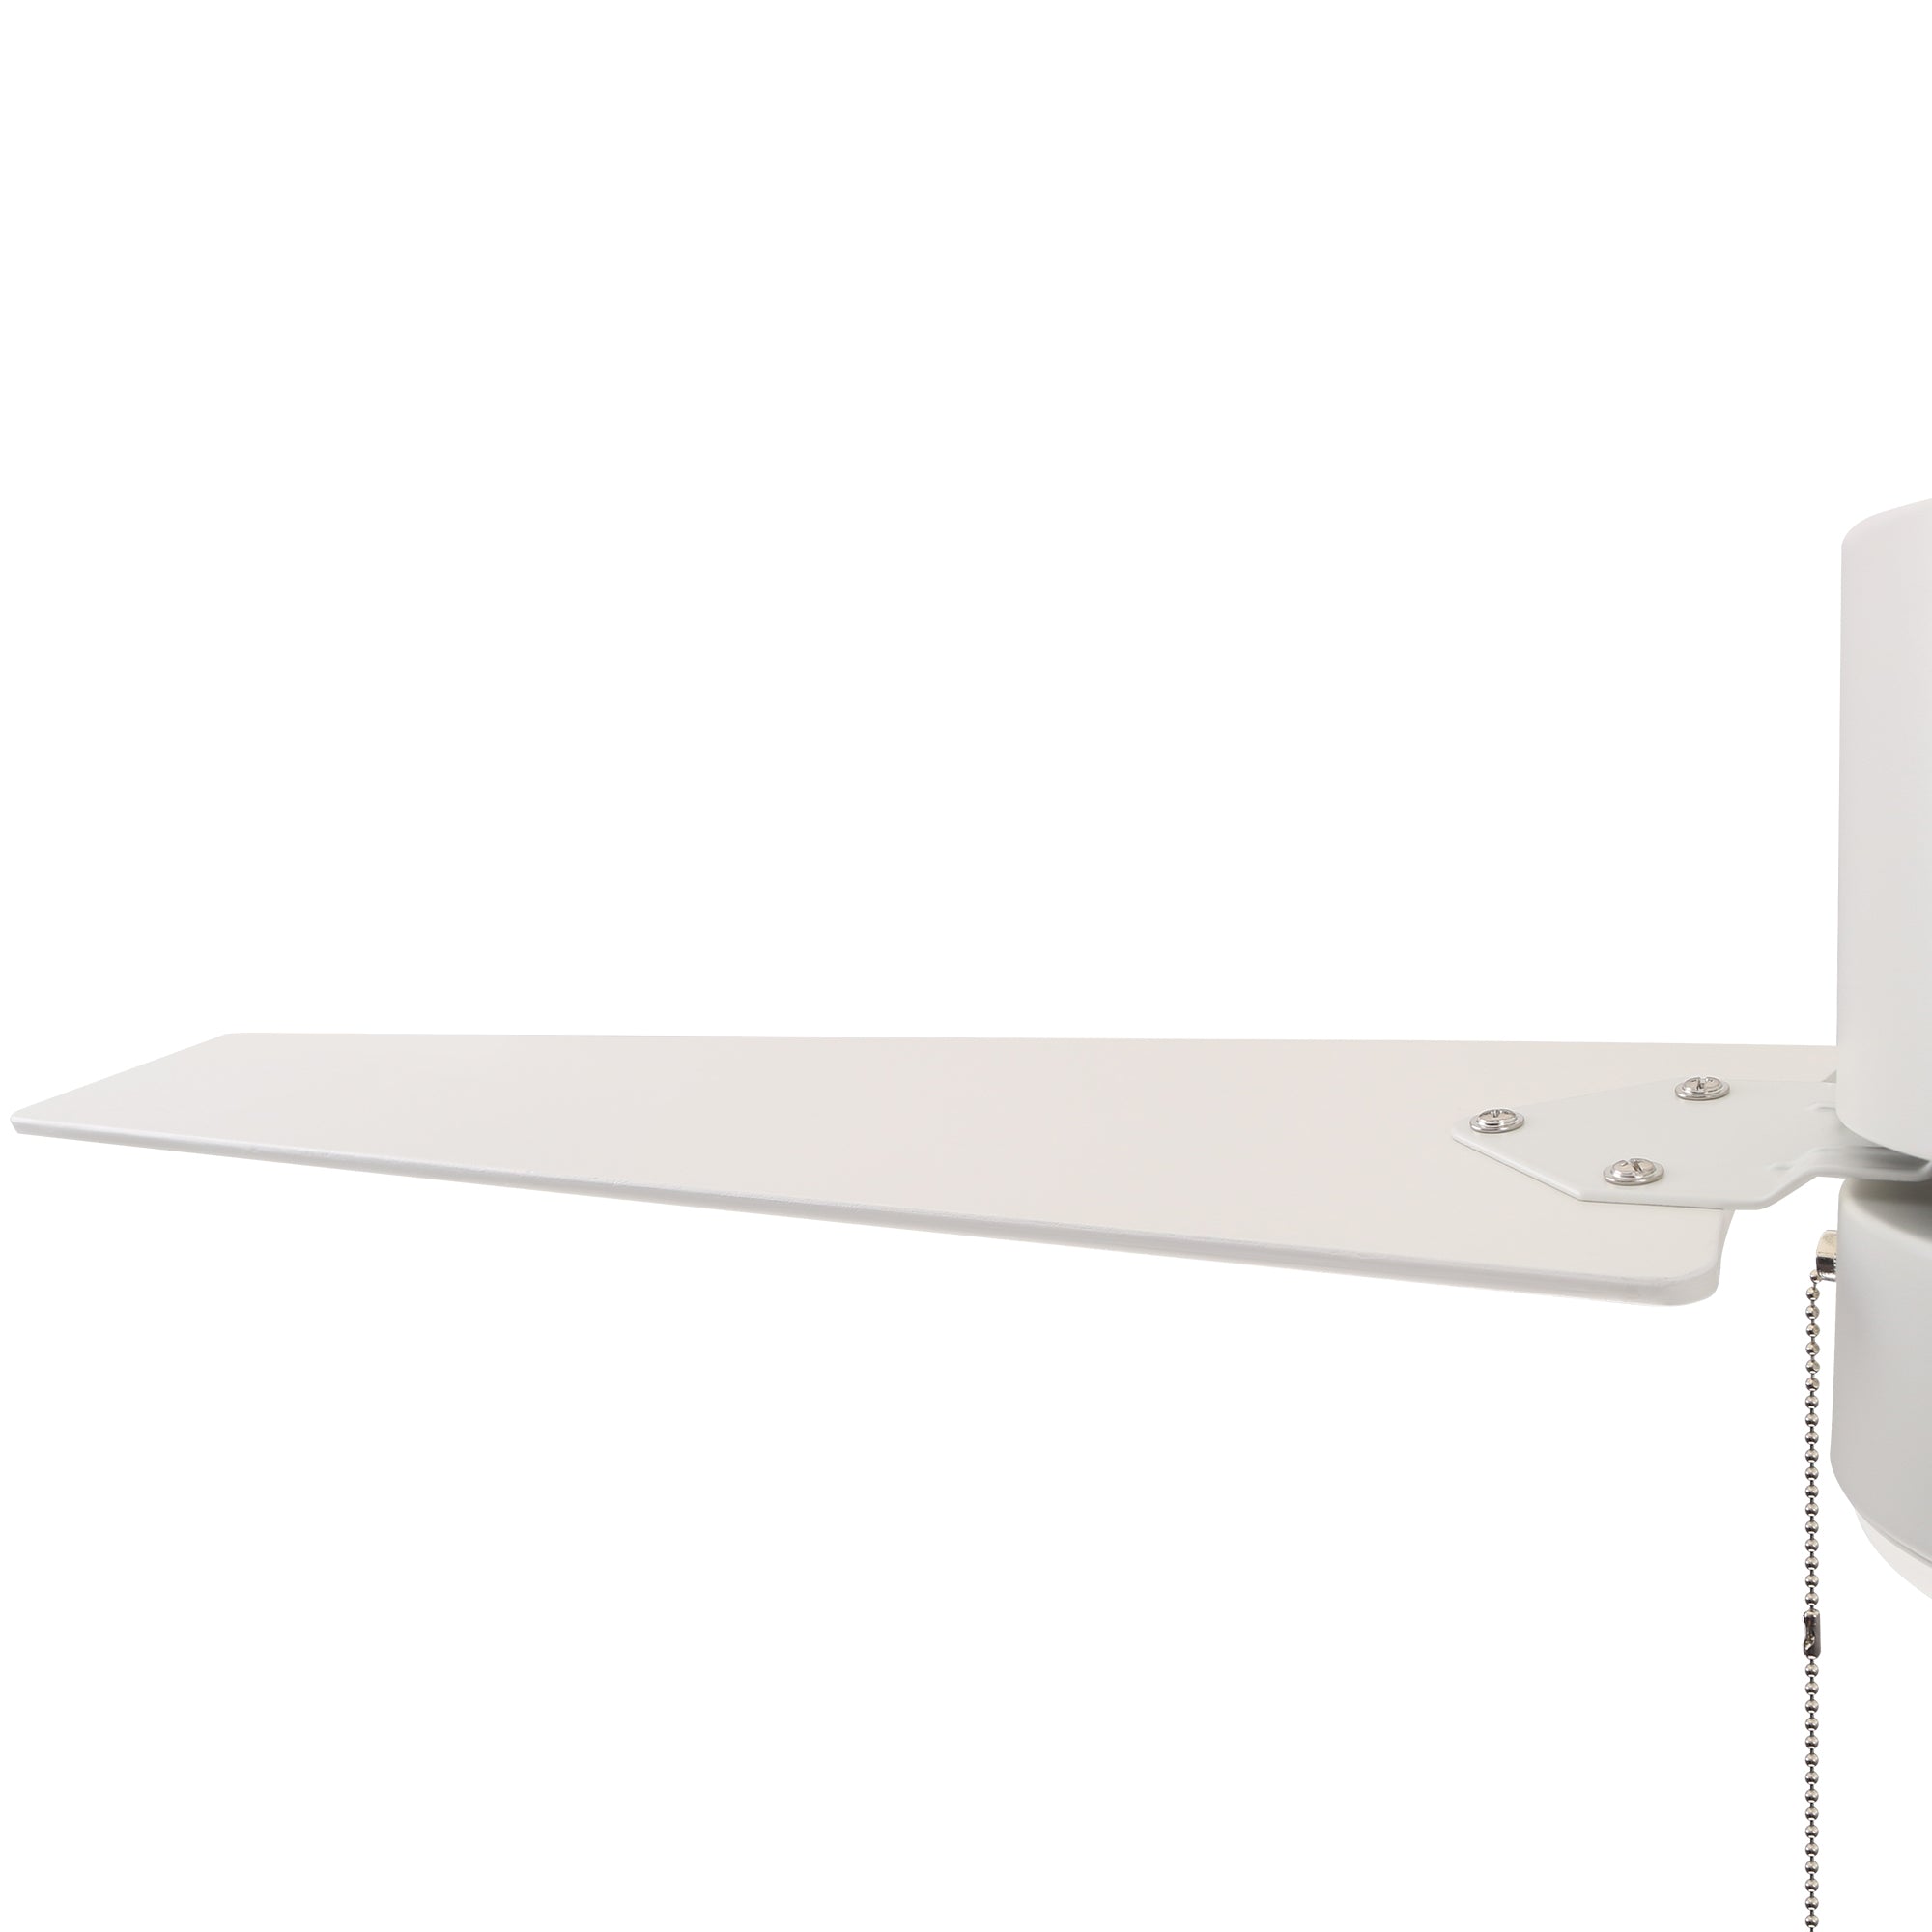 This Dulac 52&#39;&#39;Ceiling Fan keeps your space cool, bright, and stylish. It is a soft modern masterpiece perfect for your large indoor living spaces. This Model ceiling fan is a simplicity designing with White finish, use elegant Plywood blades and has an integrated 3000K LED warm light. The fan feature the pull chain switches to set fan speeds and lighting On/Off. 